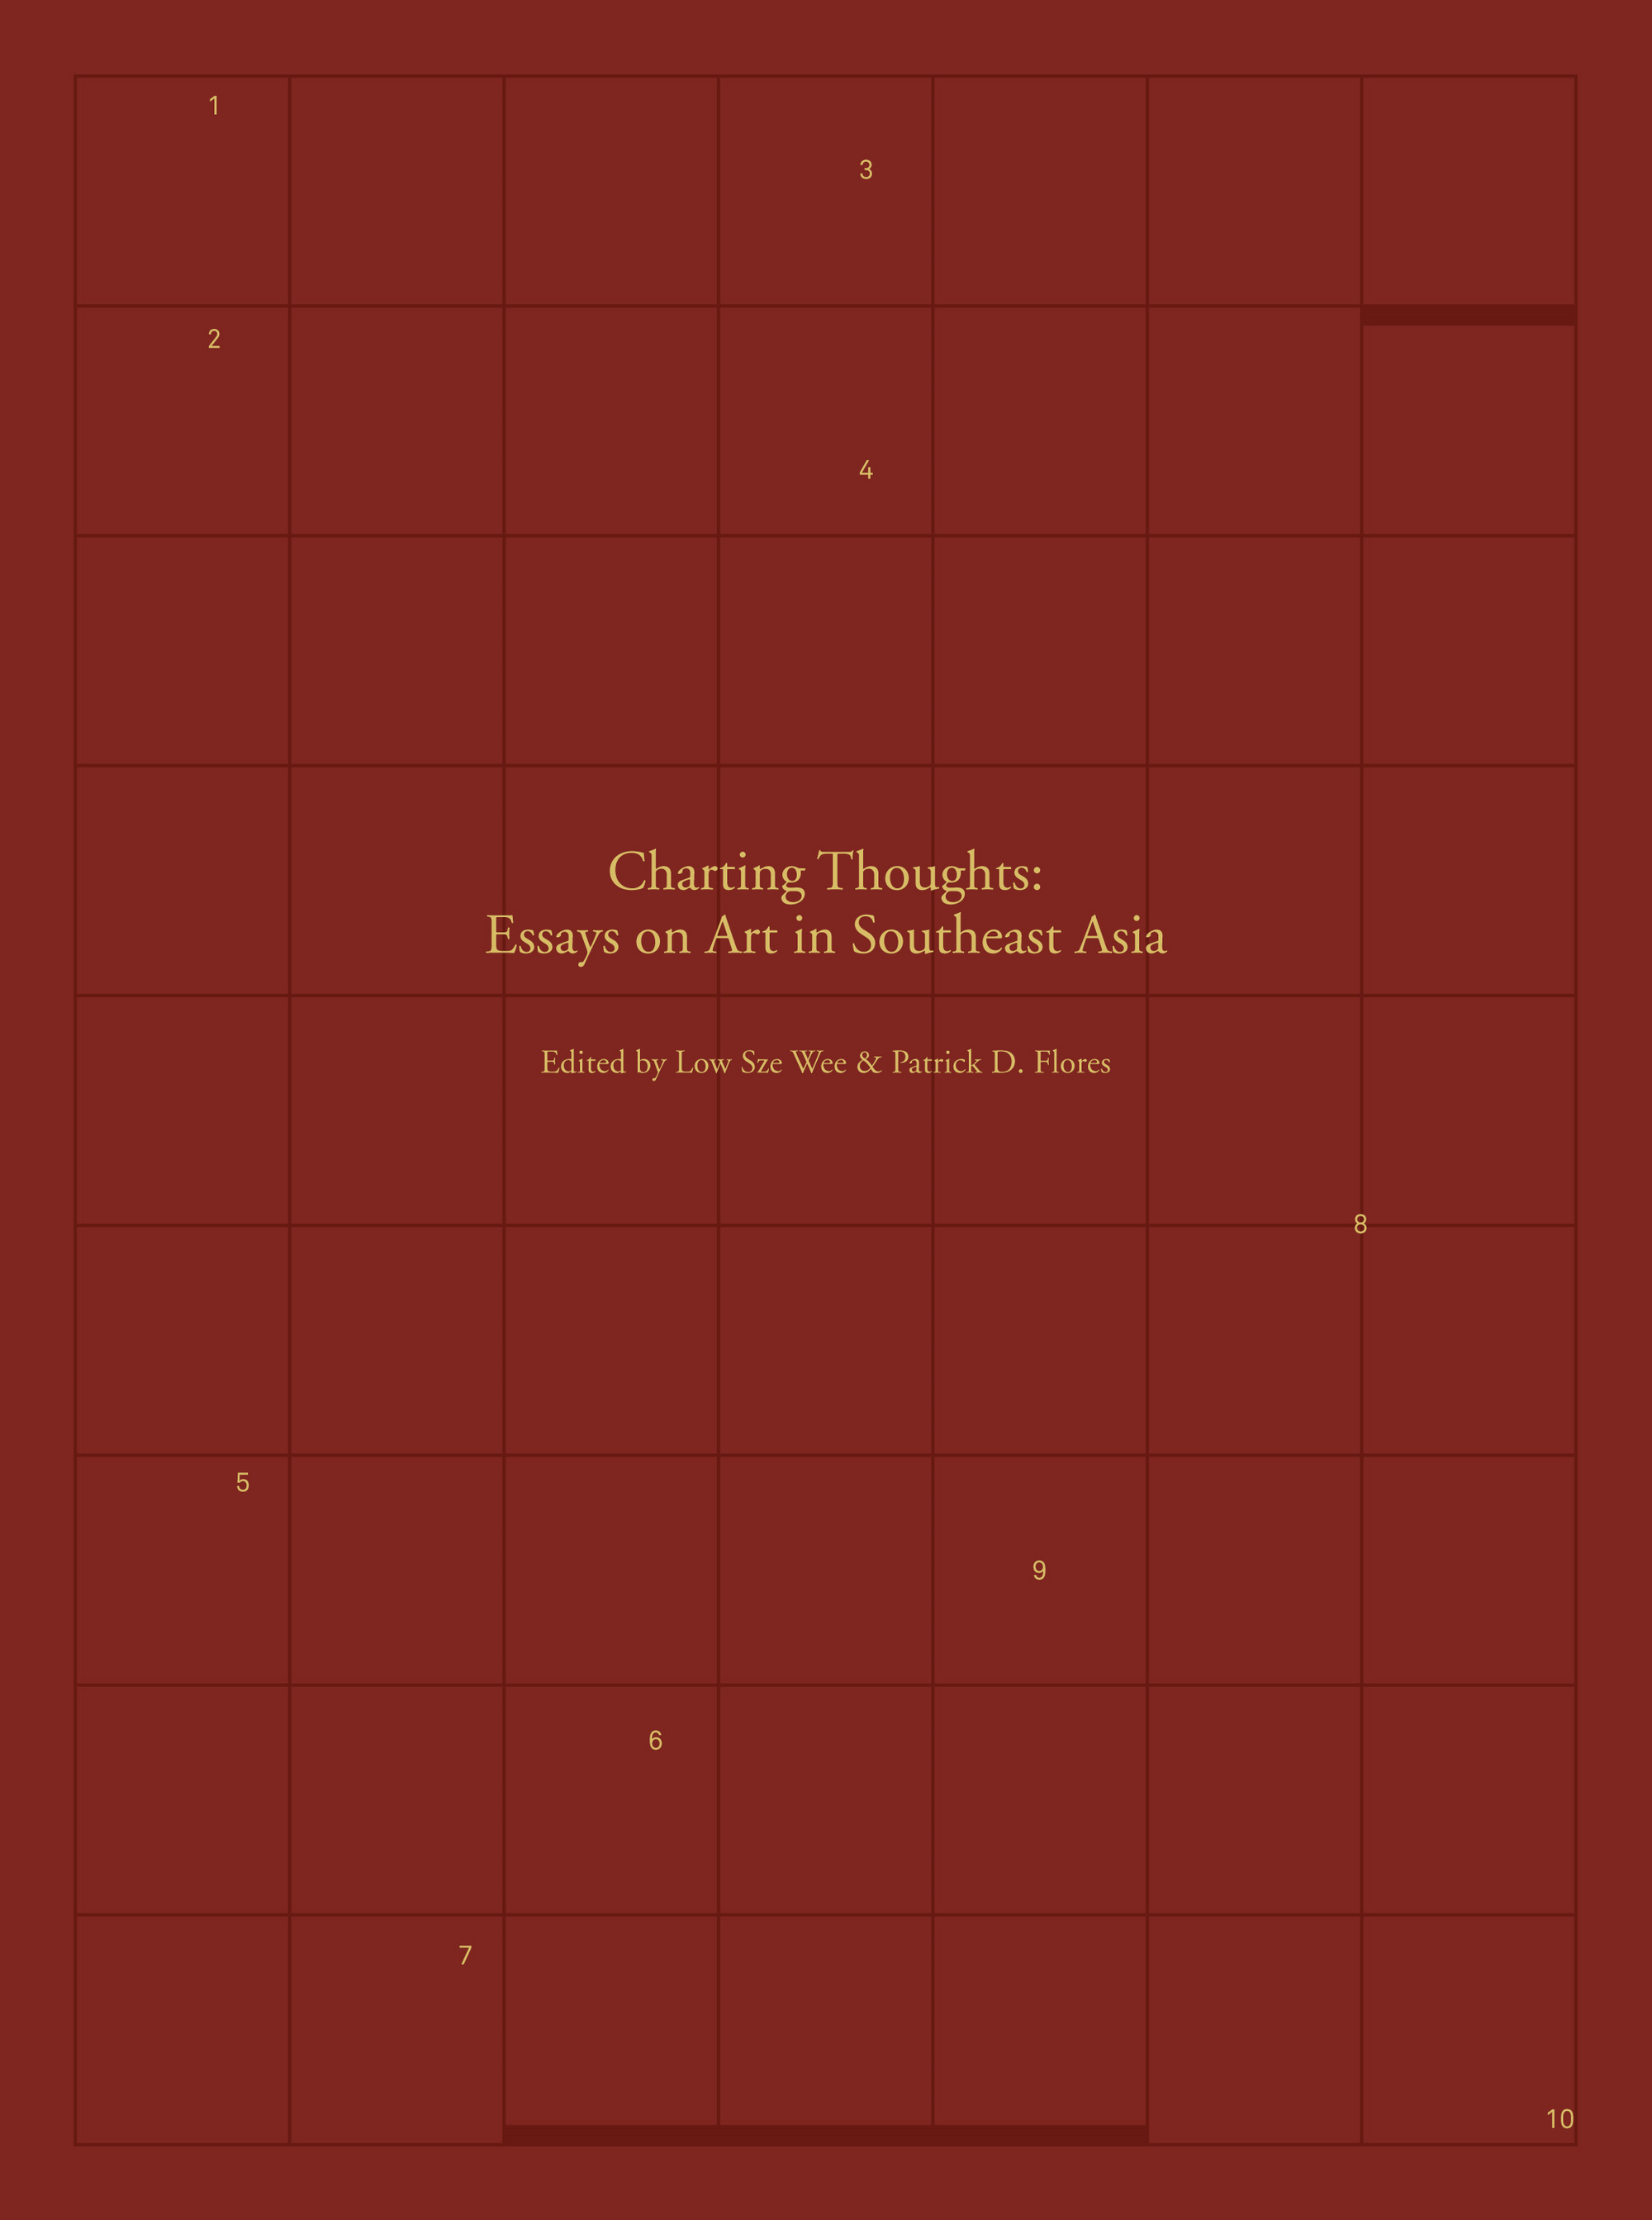 CHARTING THOUGHTS: ESSAYS ON ART IN SOUTHEAST ASIA